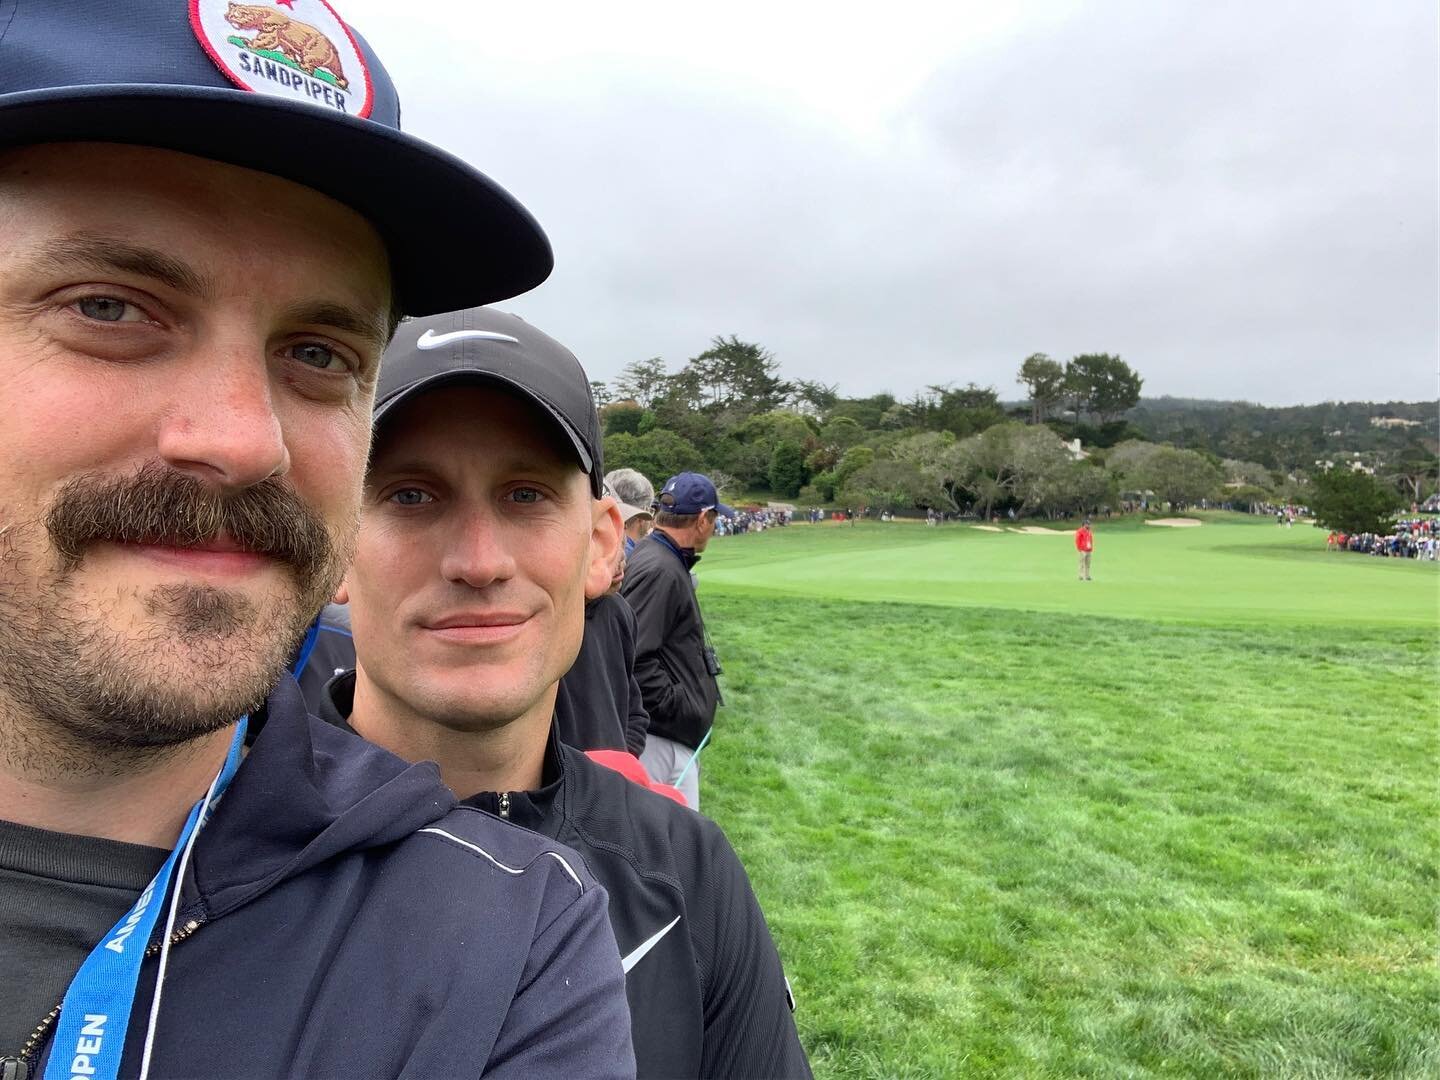 Got to watch my brother Chase see his idol Tiger Woods for the very first time this past weekend at the final round of the U.S. Open at breathtaking Pebble Beach. We spent the week traveling up the coast of CA on US 1 playing golf every day at some o